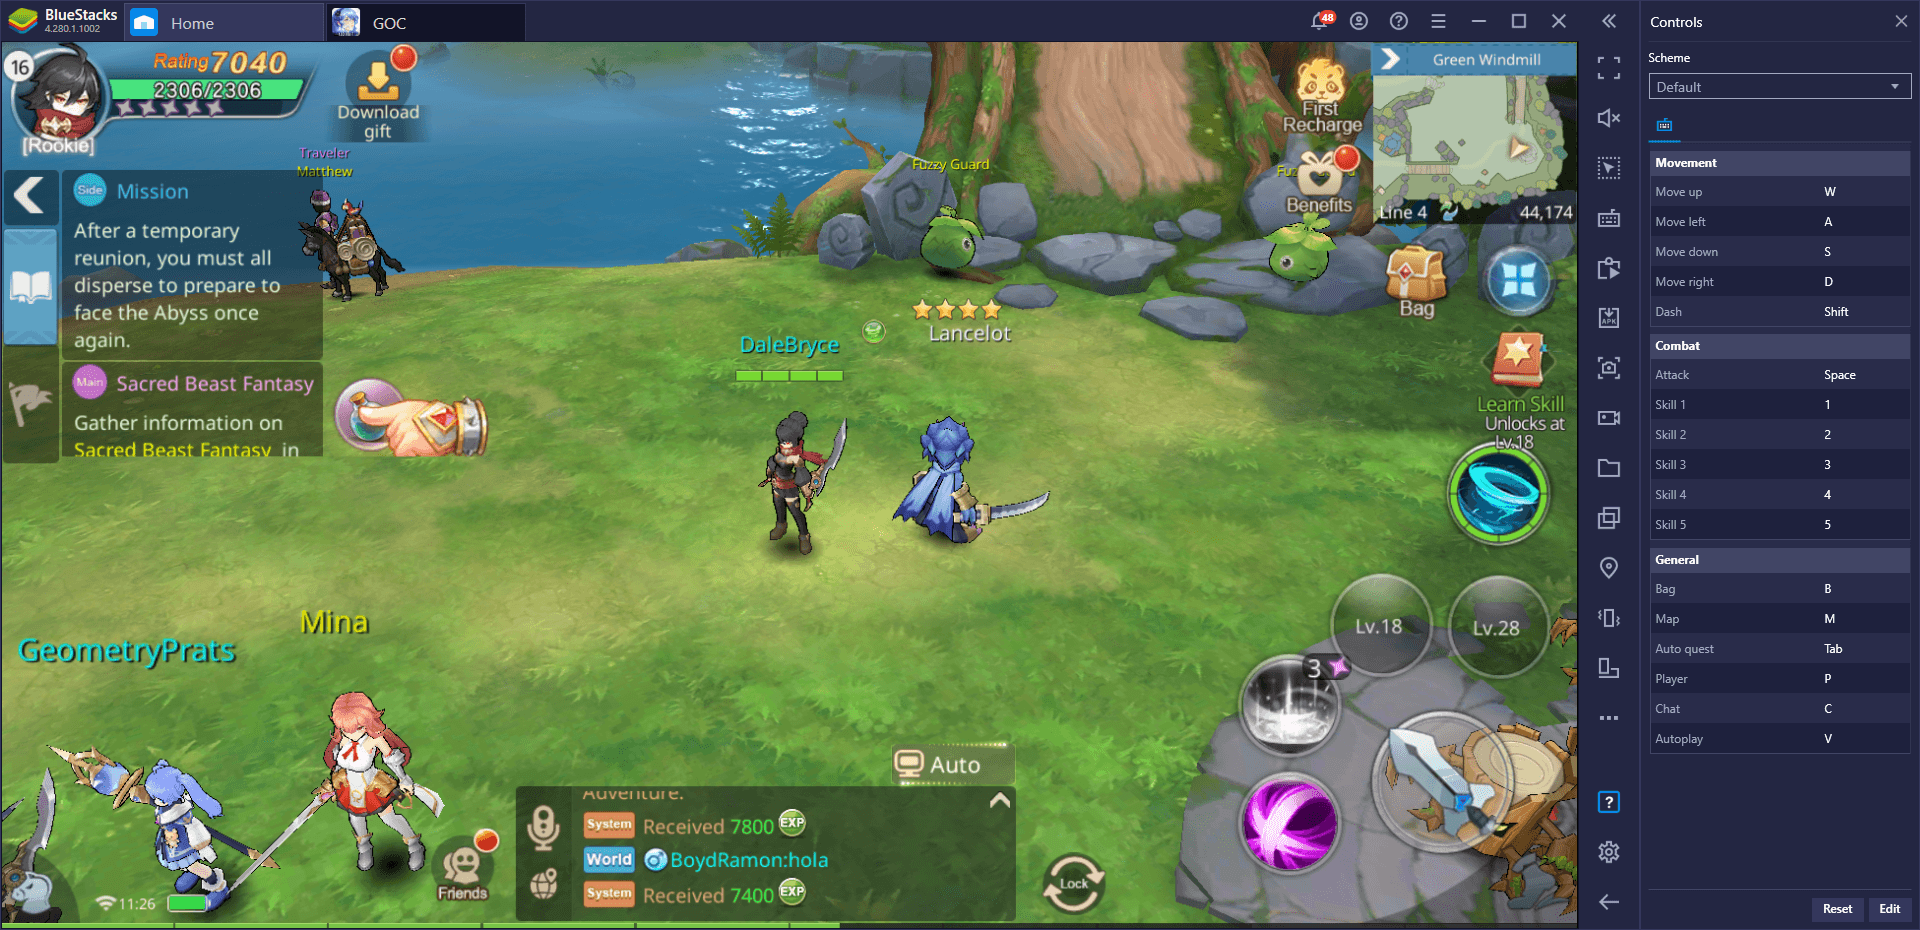 Guardians of Cloudia - How to Use BlueStacks’ Tools to Your Advantage in This Mobile MMORPG